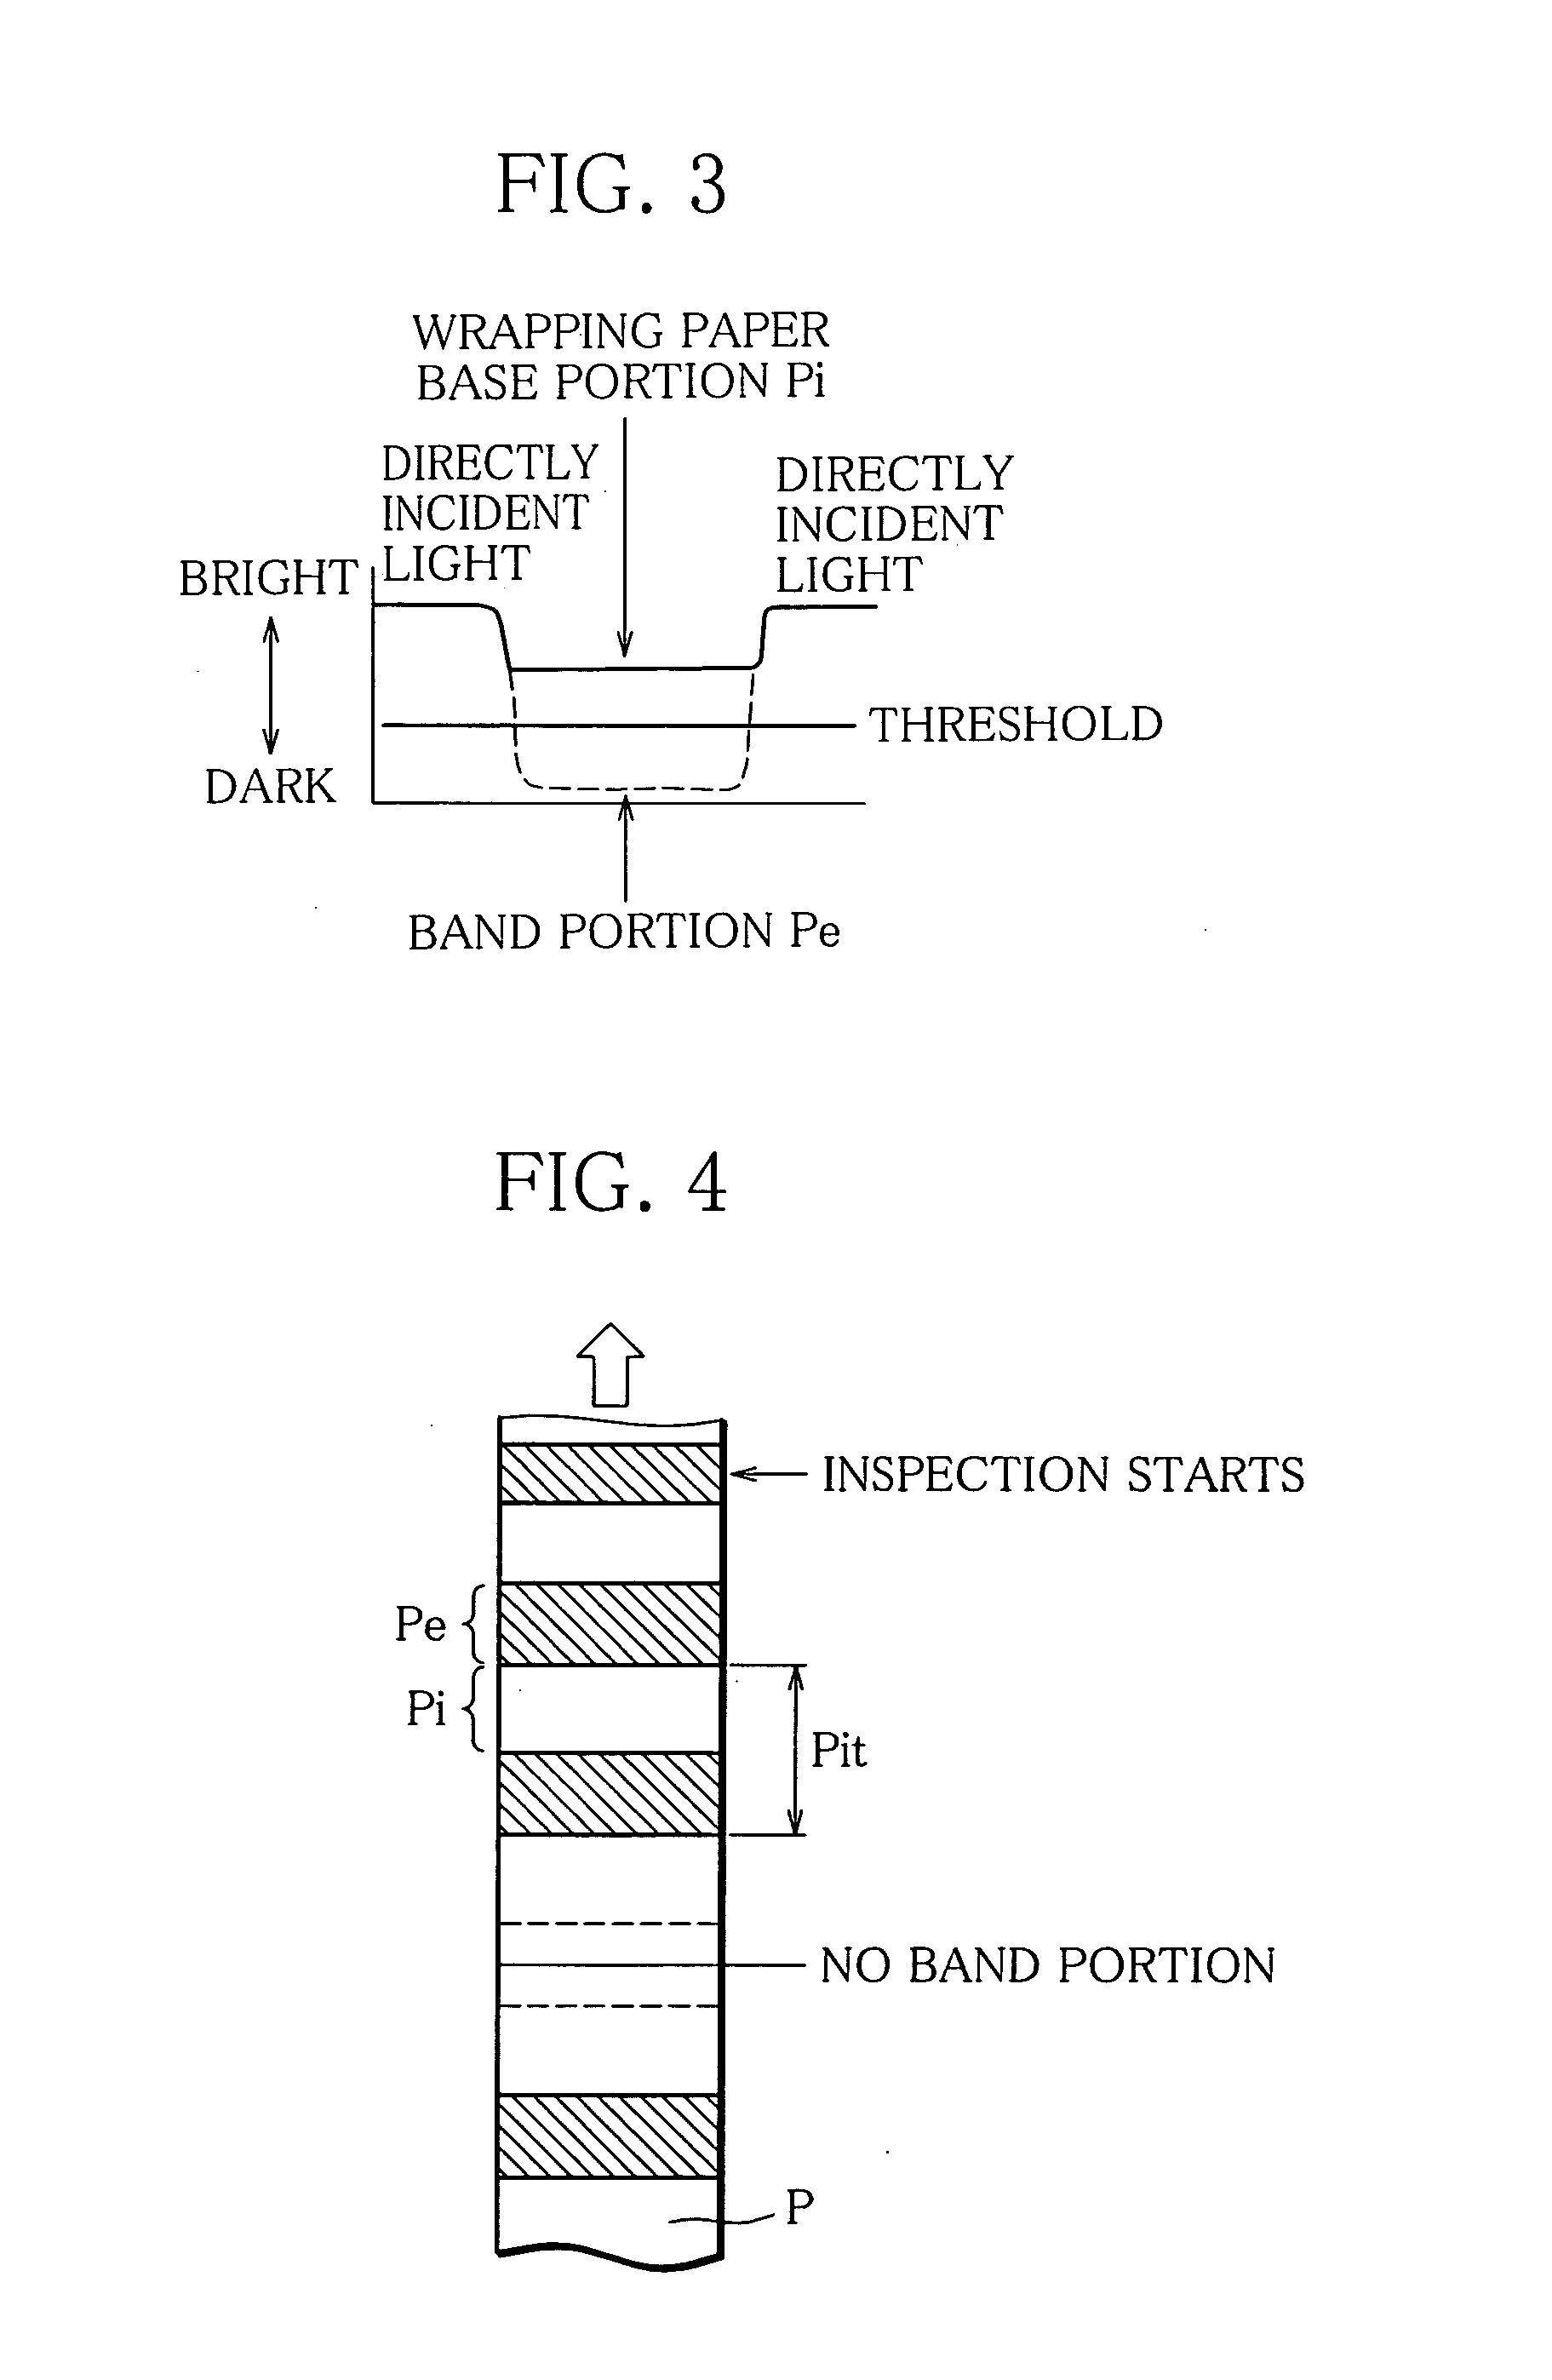 Wrapping paper inspection apparatus and tobacco wrapping machine